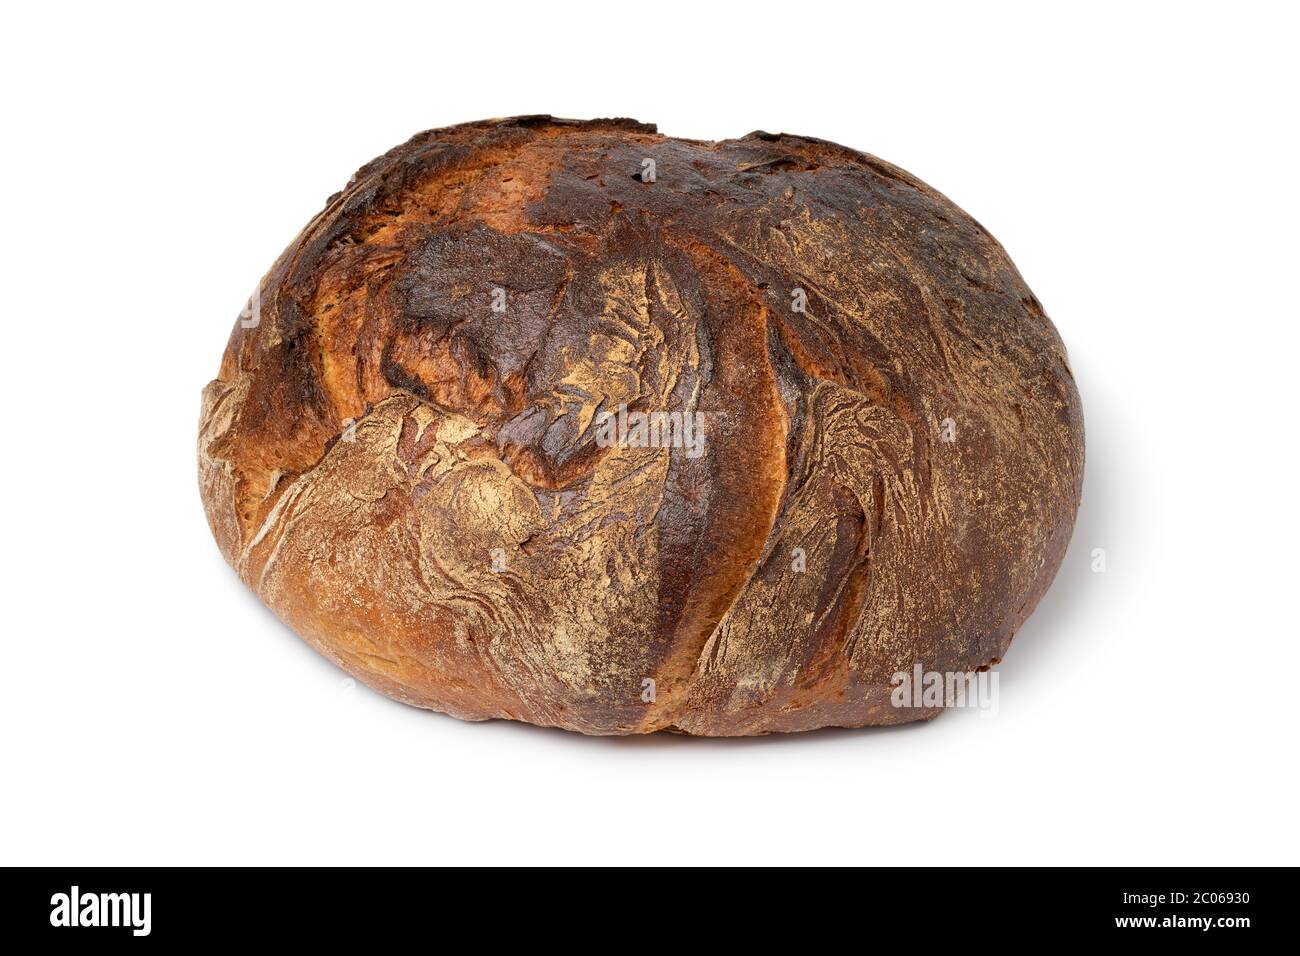 Fresh baked traditional whole white German farmers bread isolated on white background Stock Photo